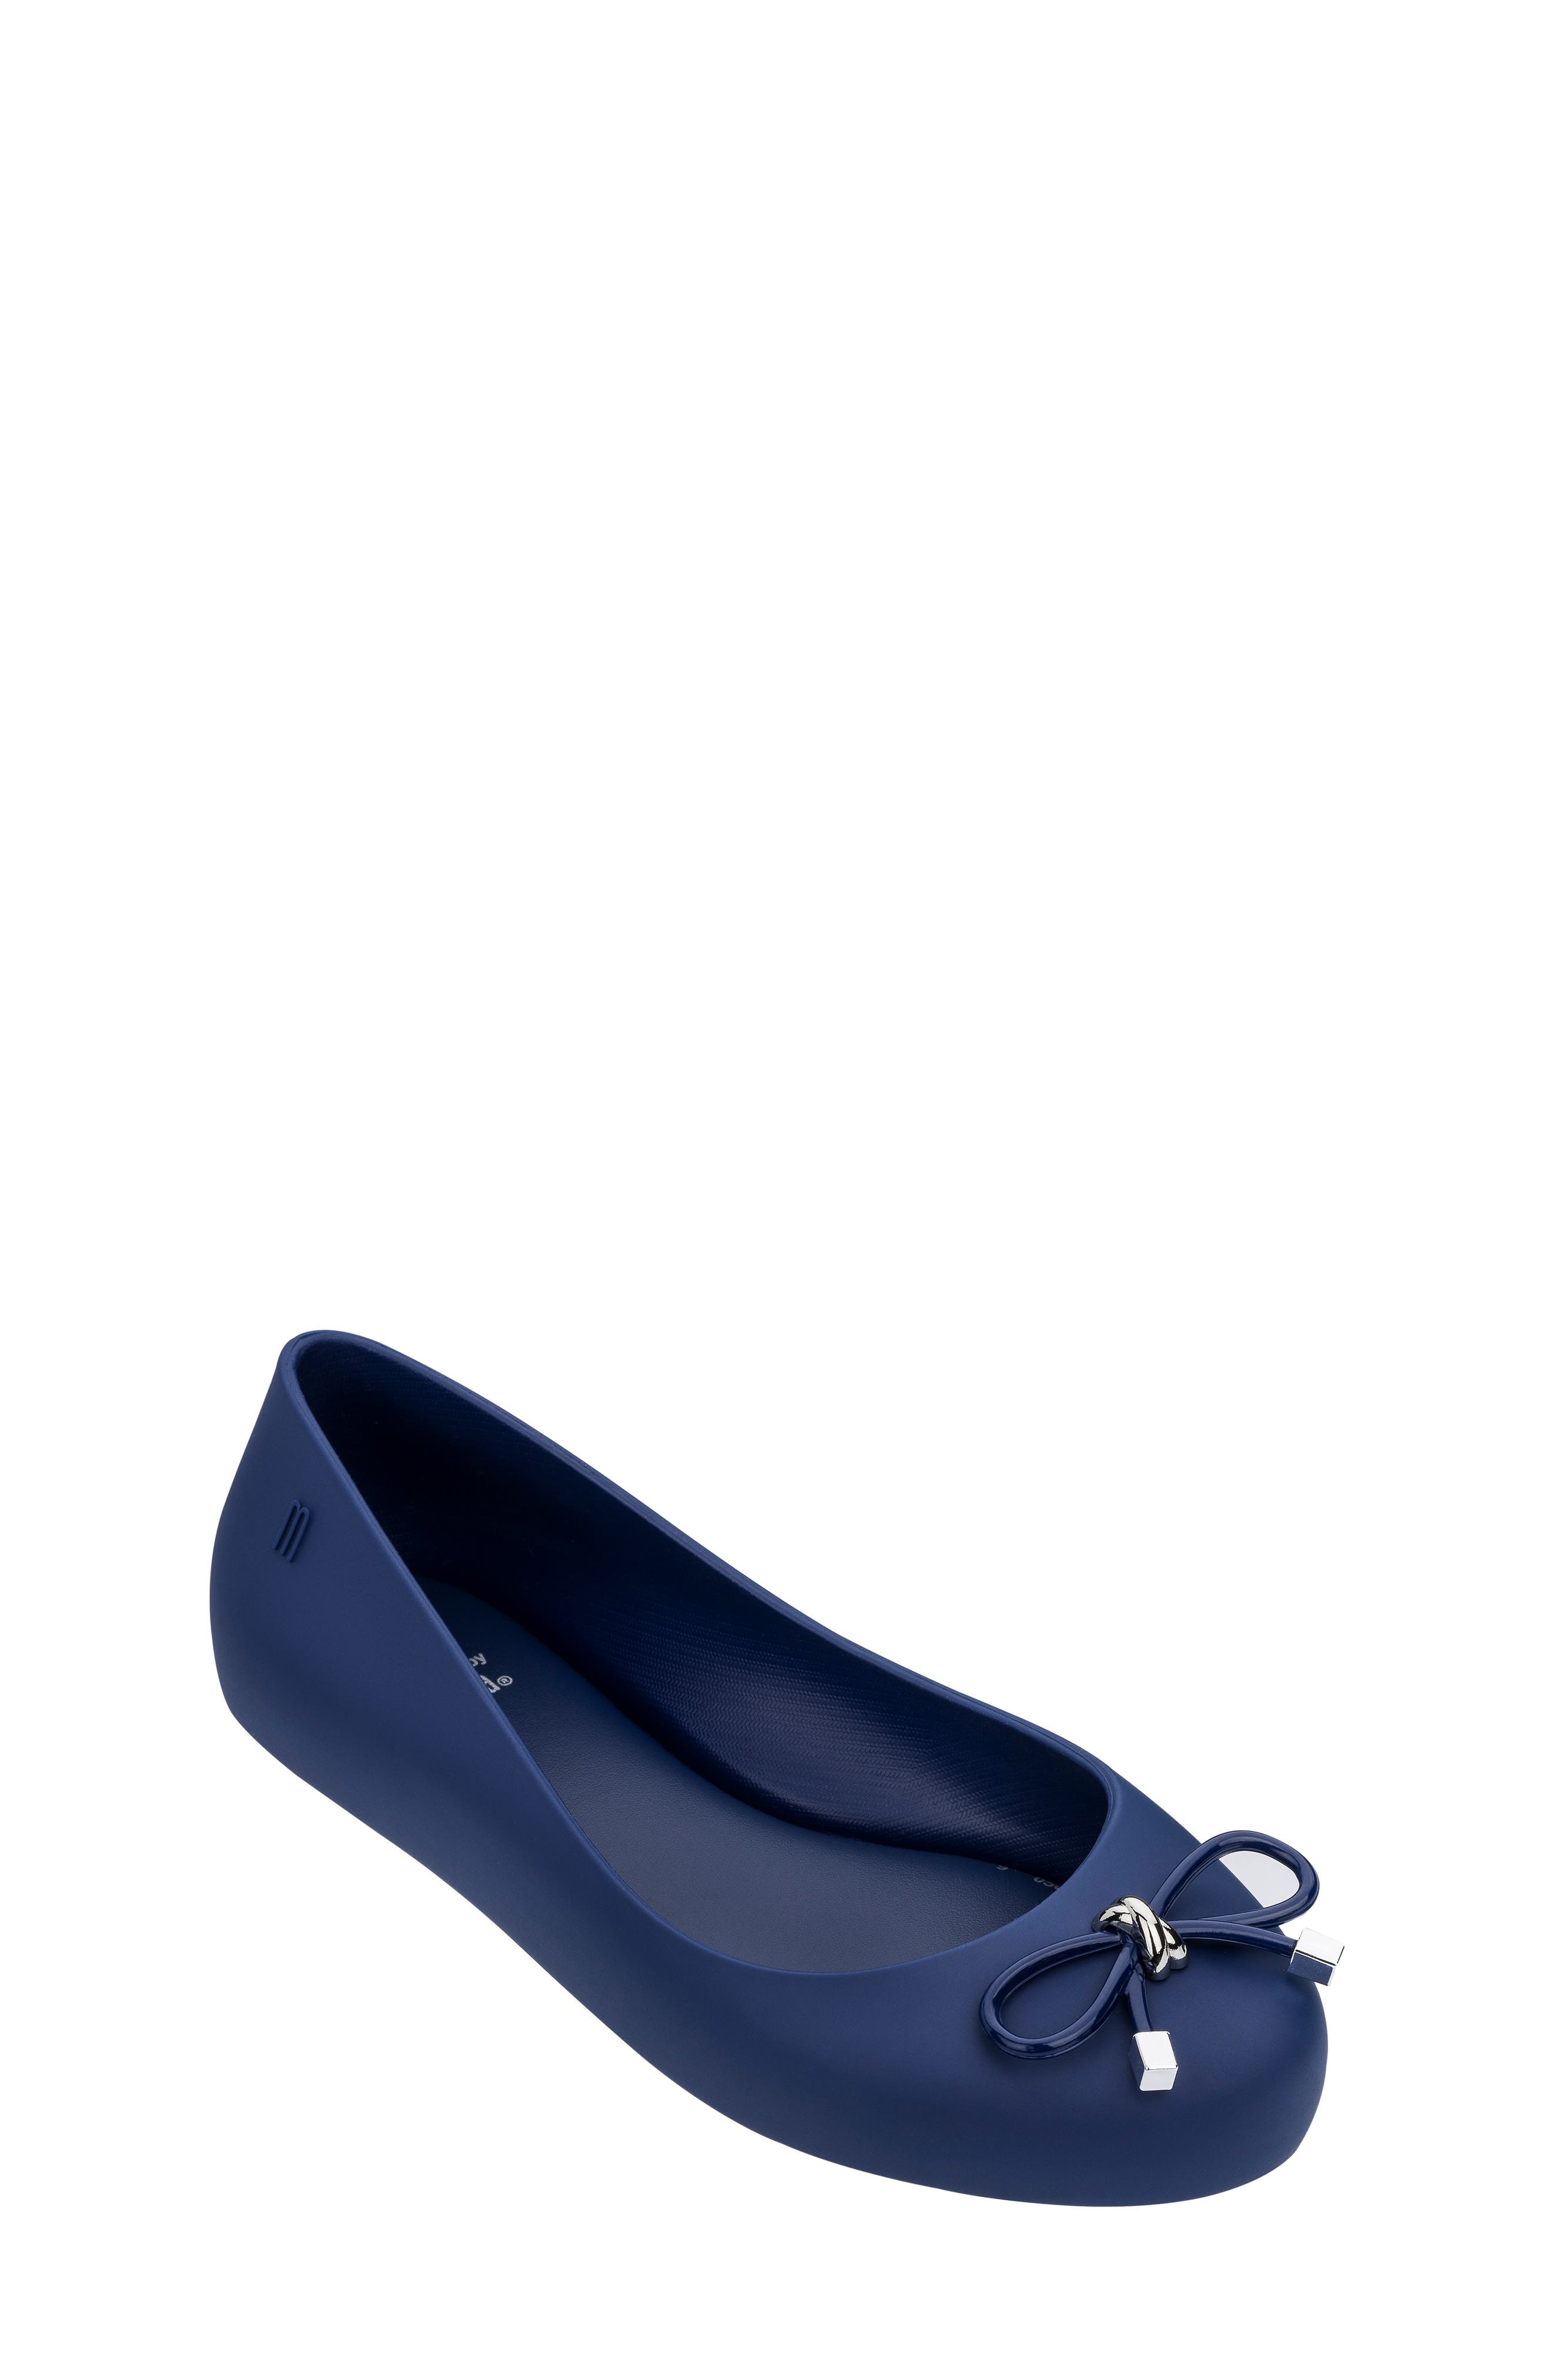 Girls Water Shoes' Shoes Sale | Nordstrom